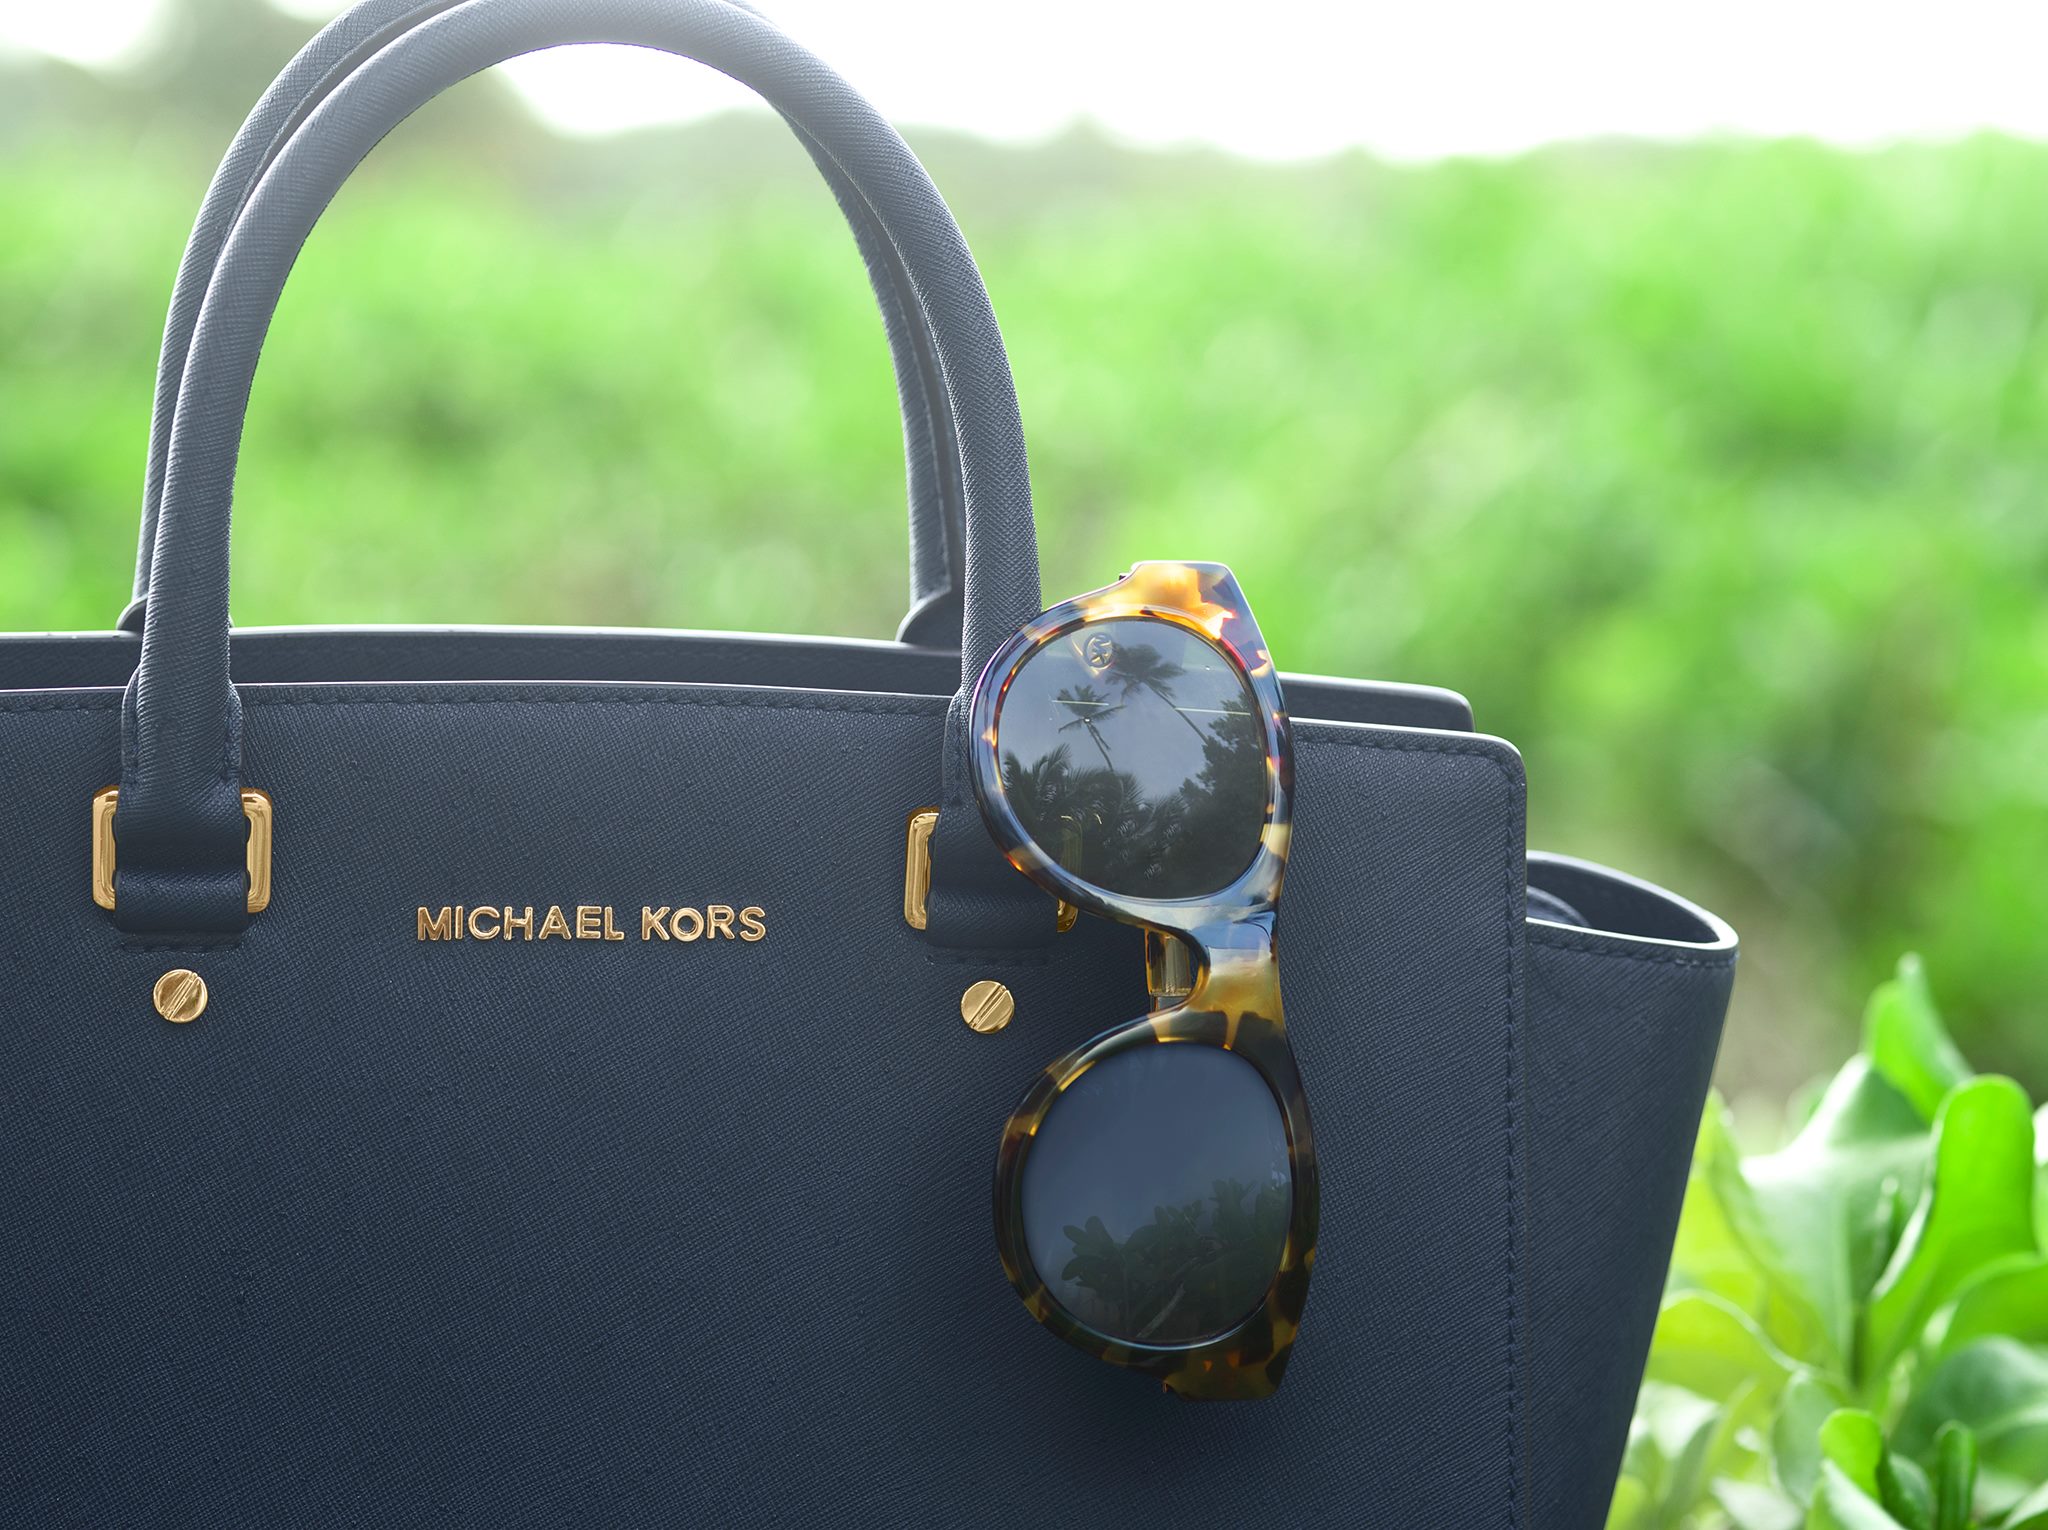 kors and accessories Spring Summer 2014 - 2LUXURY2.COM